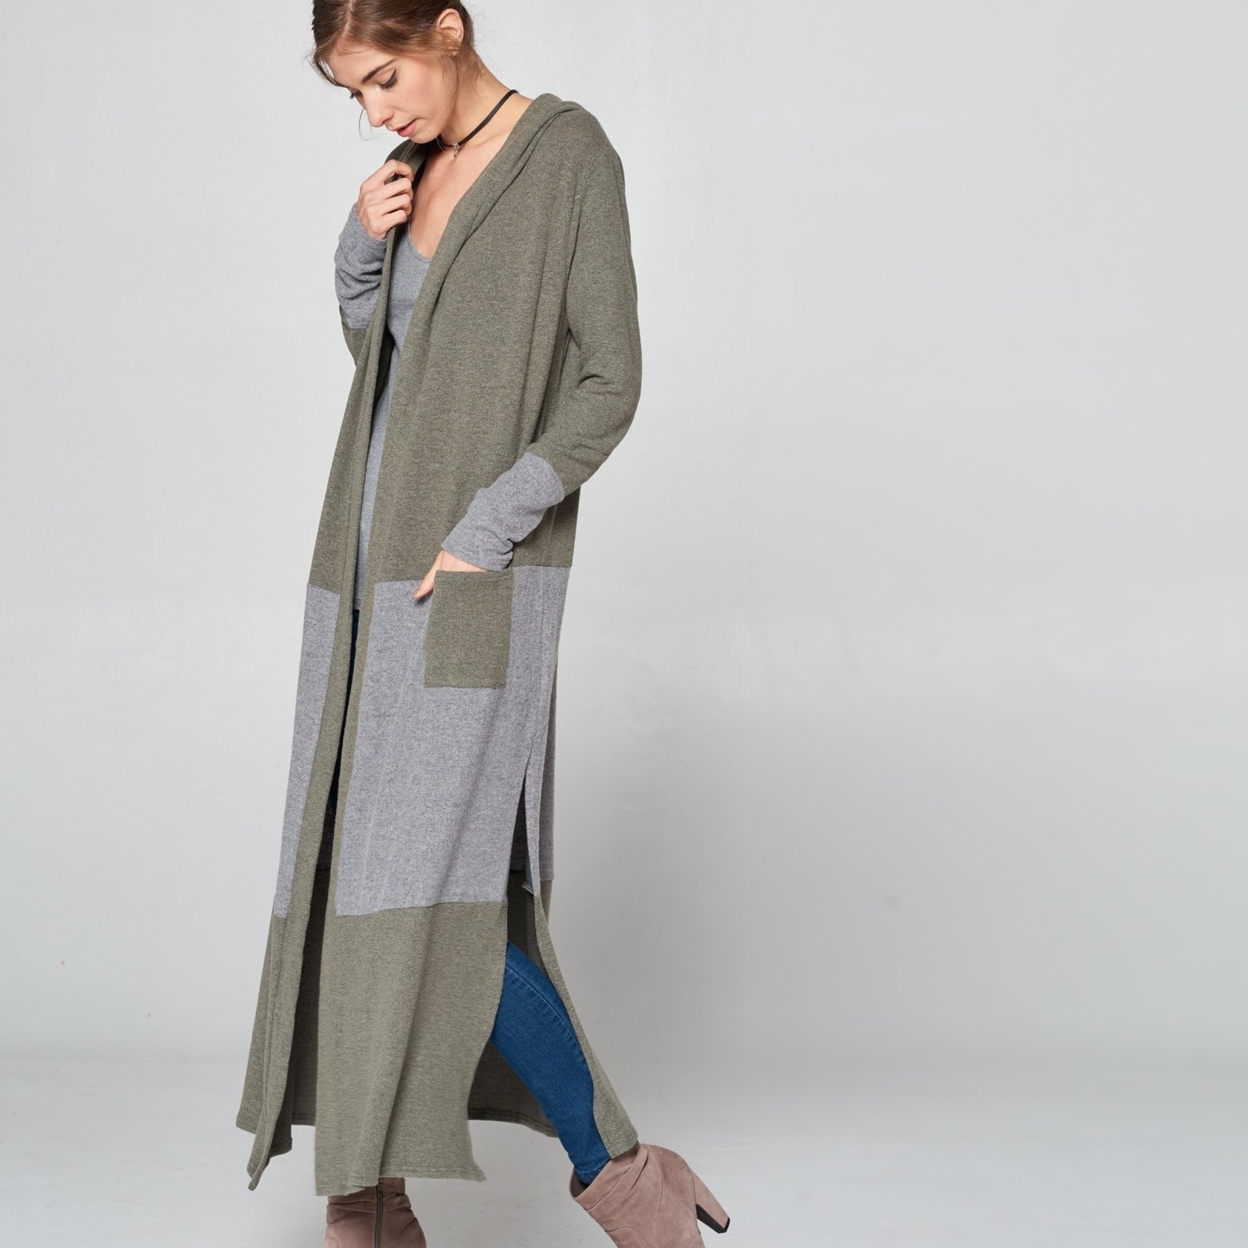 Olive & Gray Long Cardigan - Olive, Small (2-6)